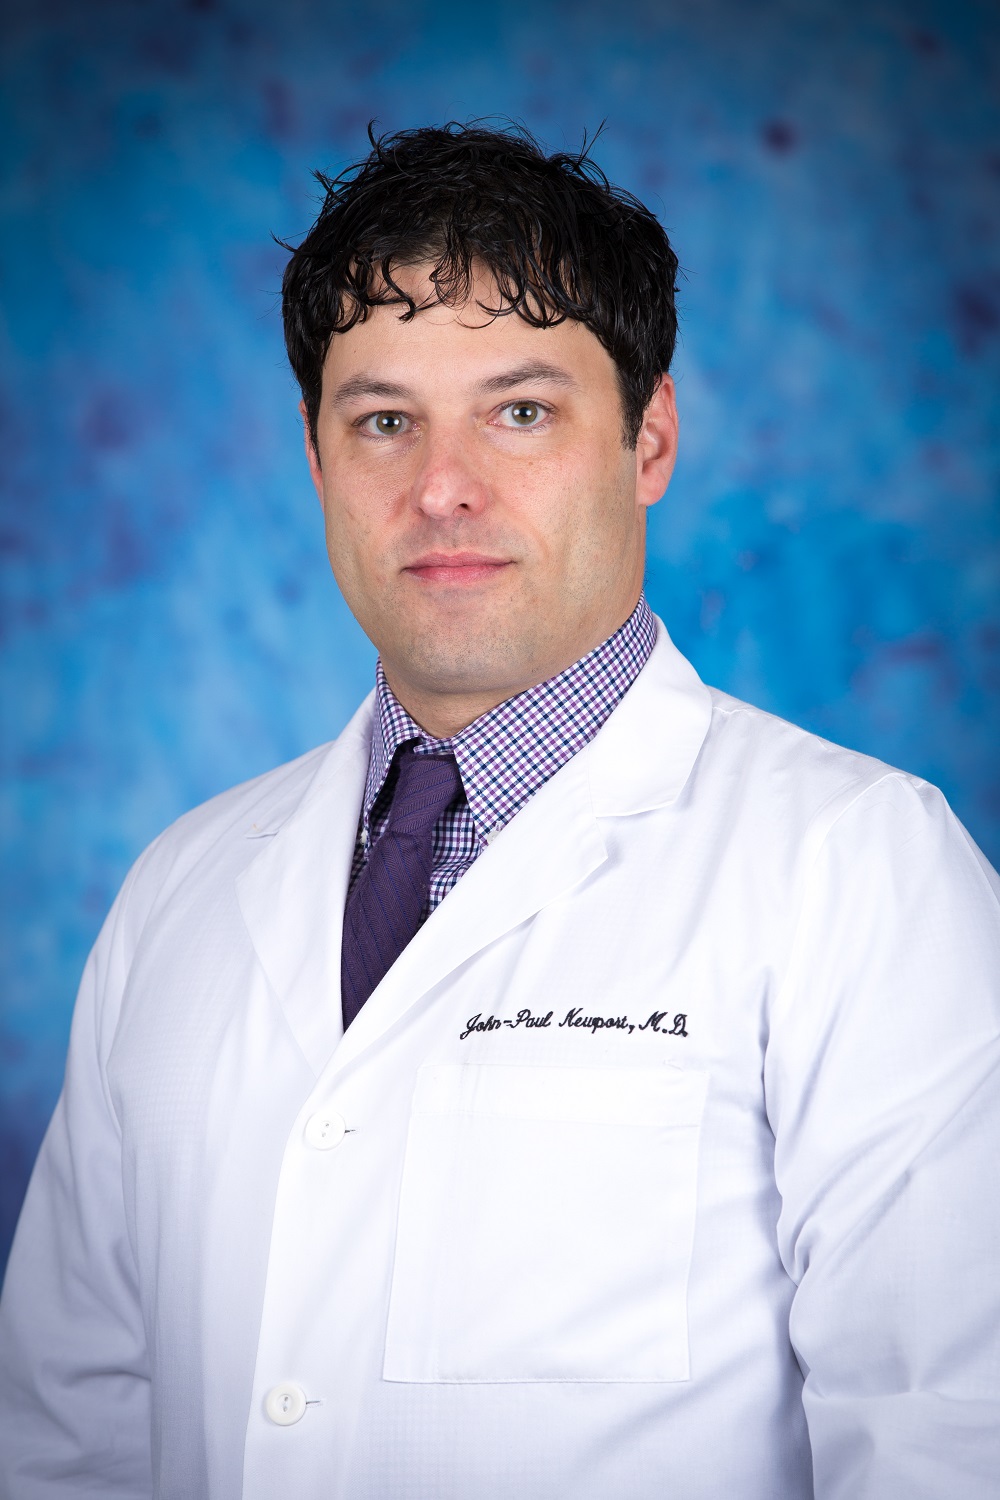 John-Paul Newport, MD of Urology Specialists of East Tennessee